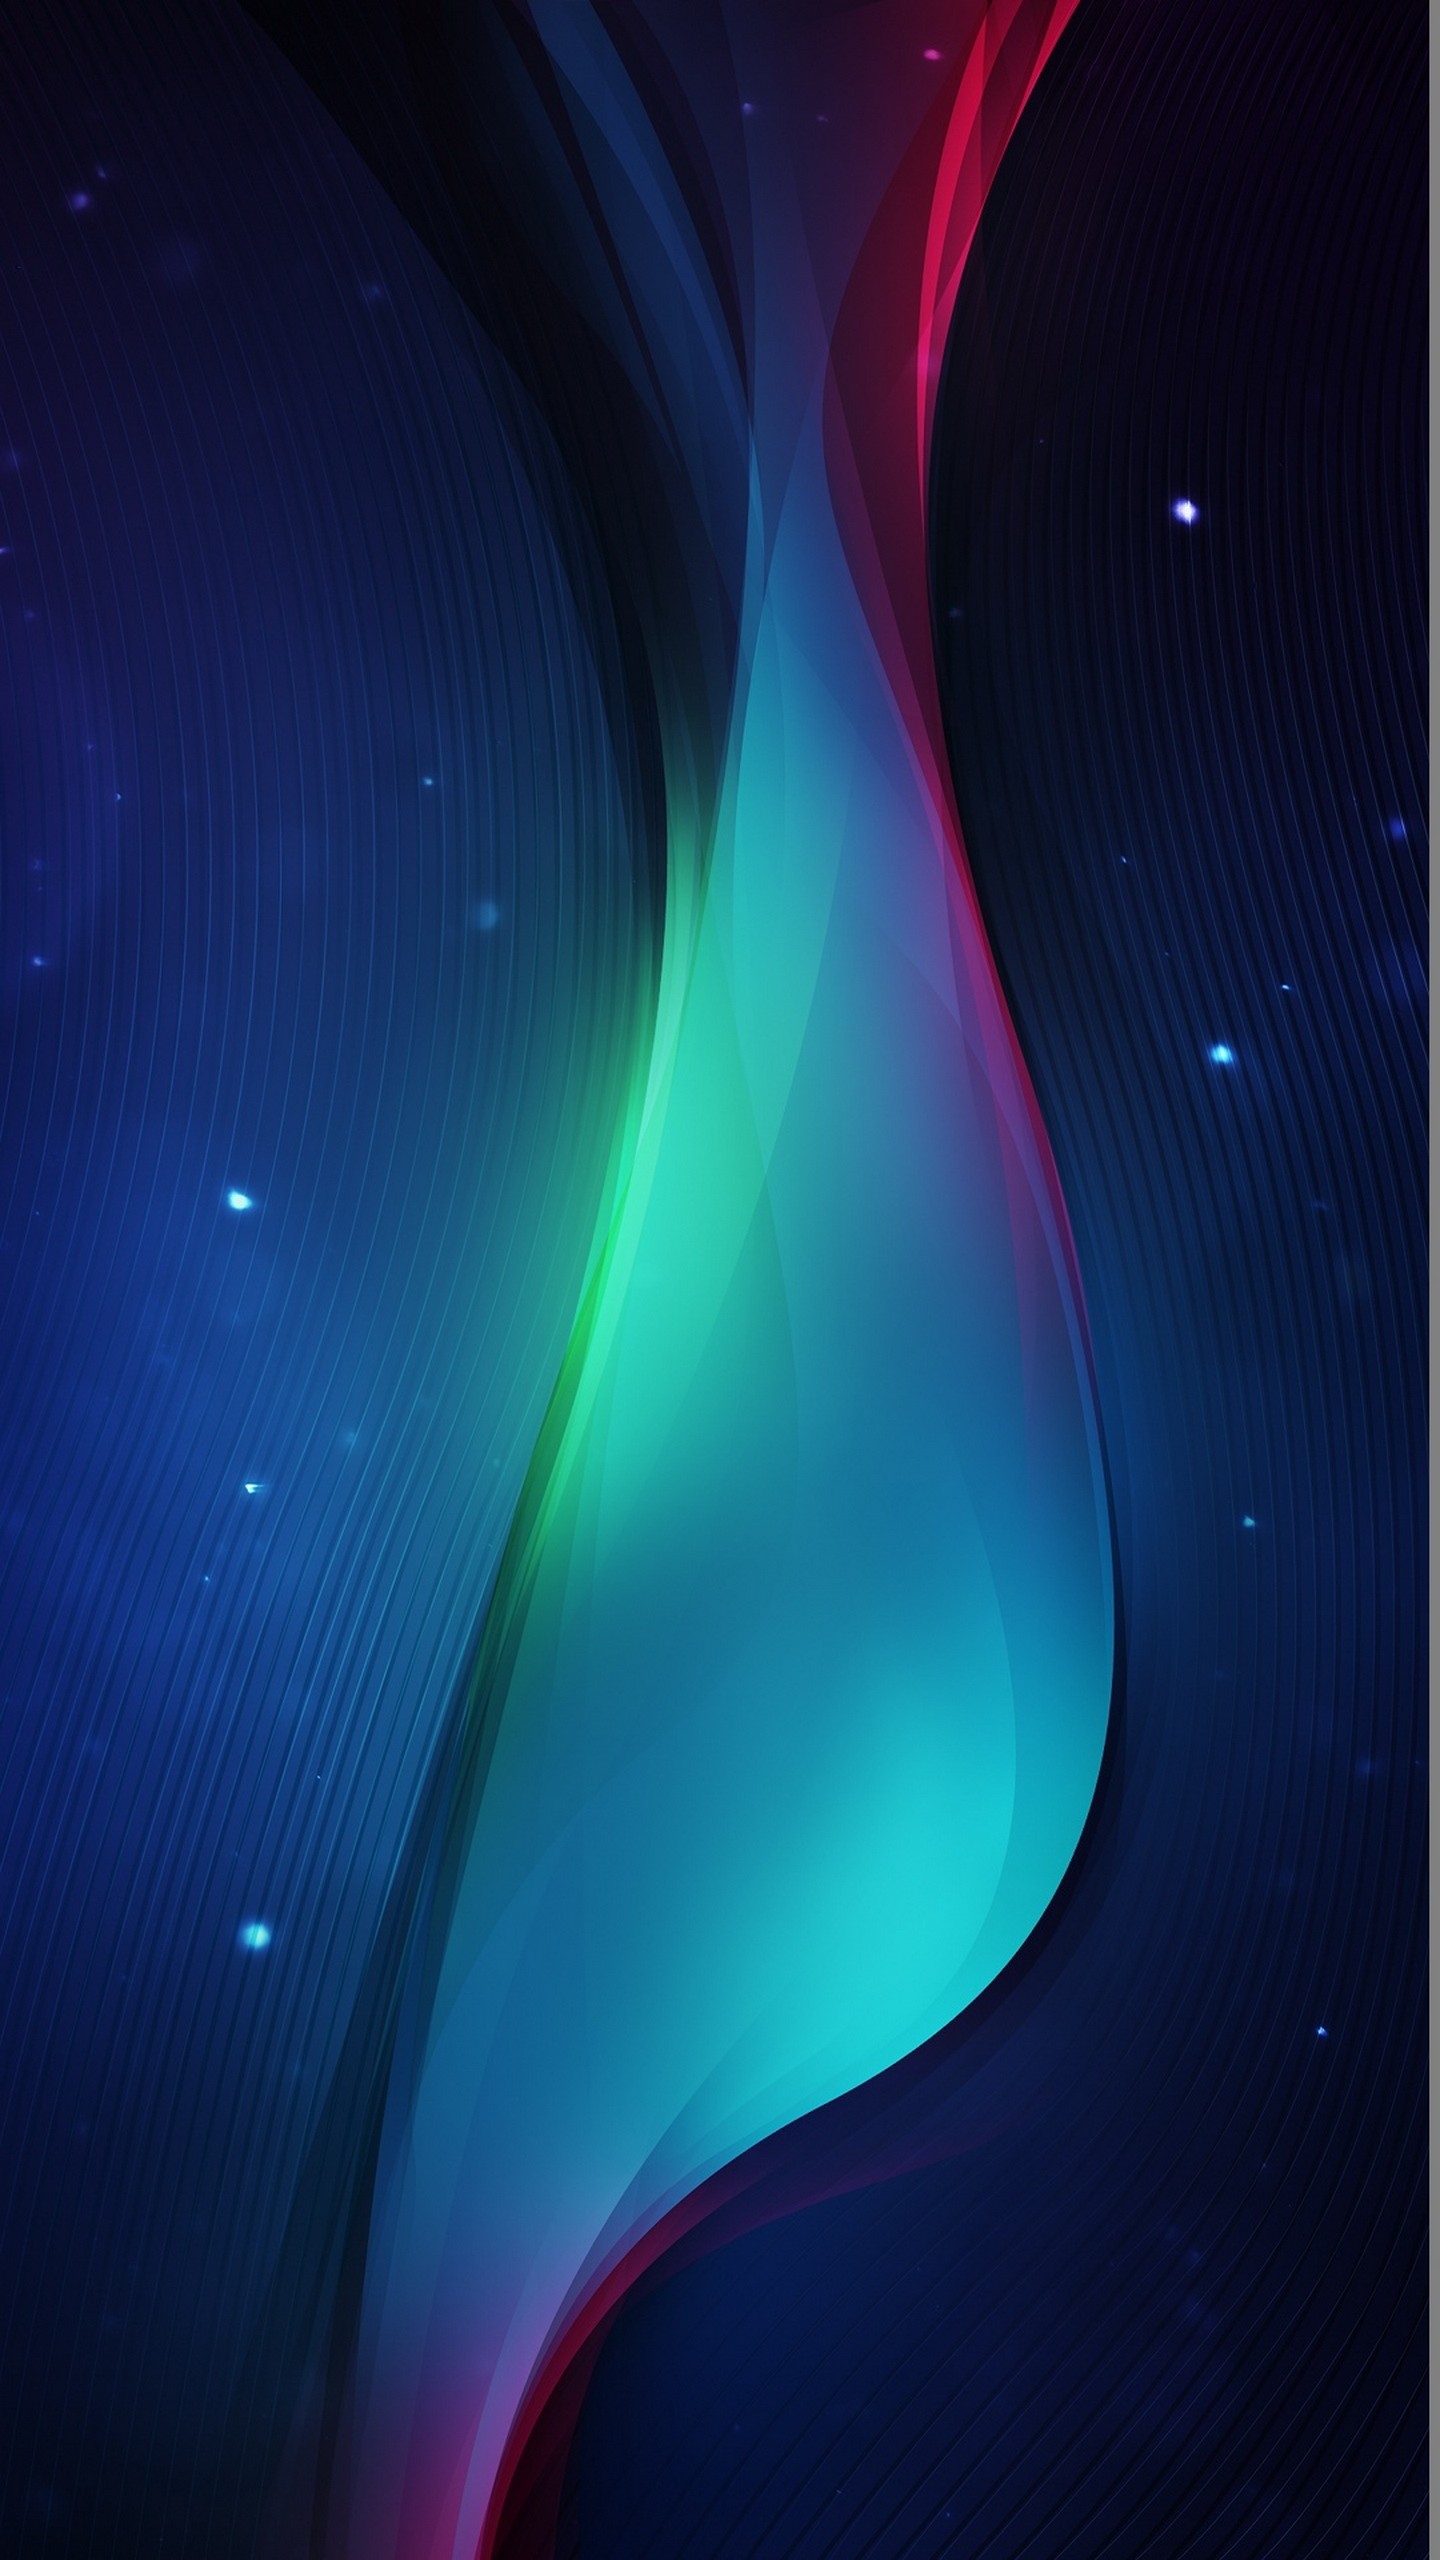 Free download Abstract Samsung Galaxy S6 Android Wallpaper free